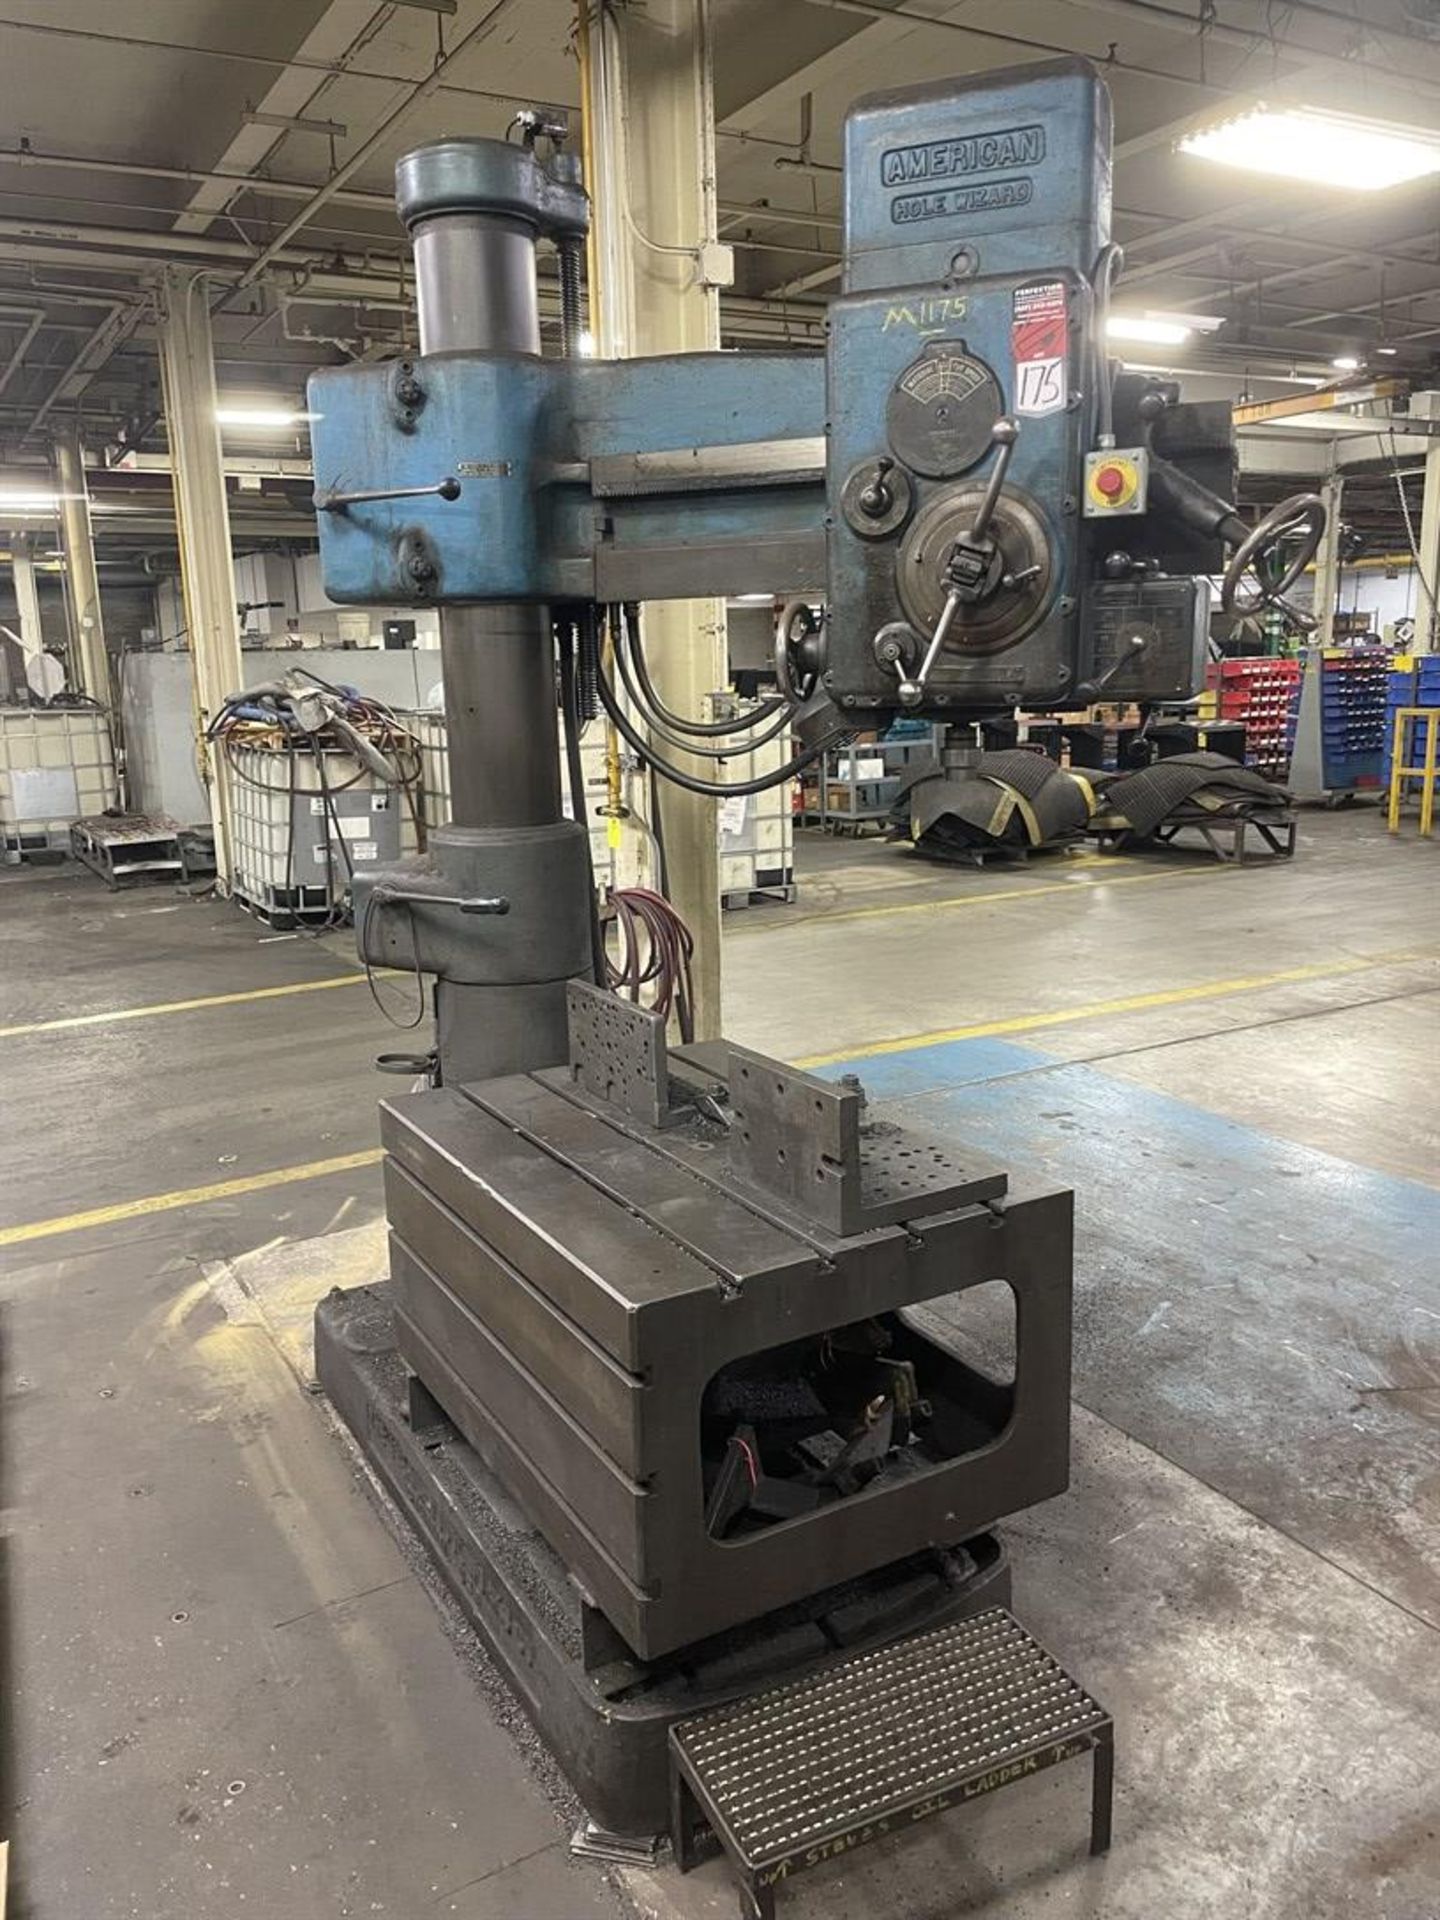 AMERICAN Hole Wizard 3’ x 9” Radial Arm Drill, 70-2100 RPM, 30” x 42” x 20” Table, (Asset # 1175)